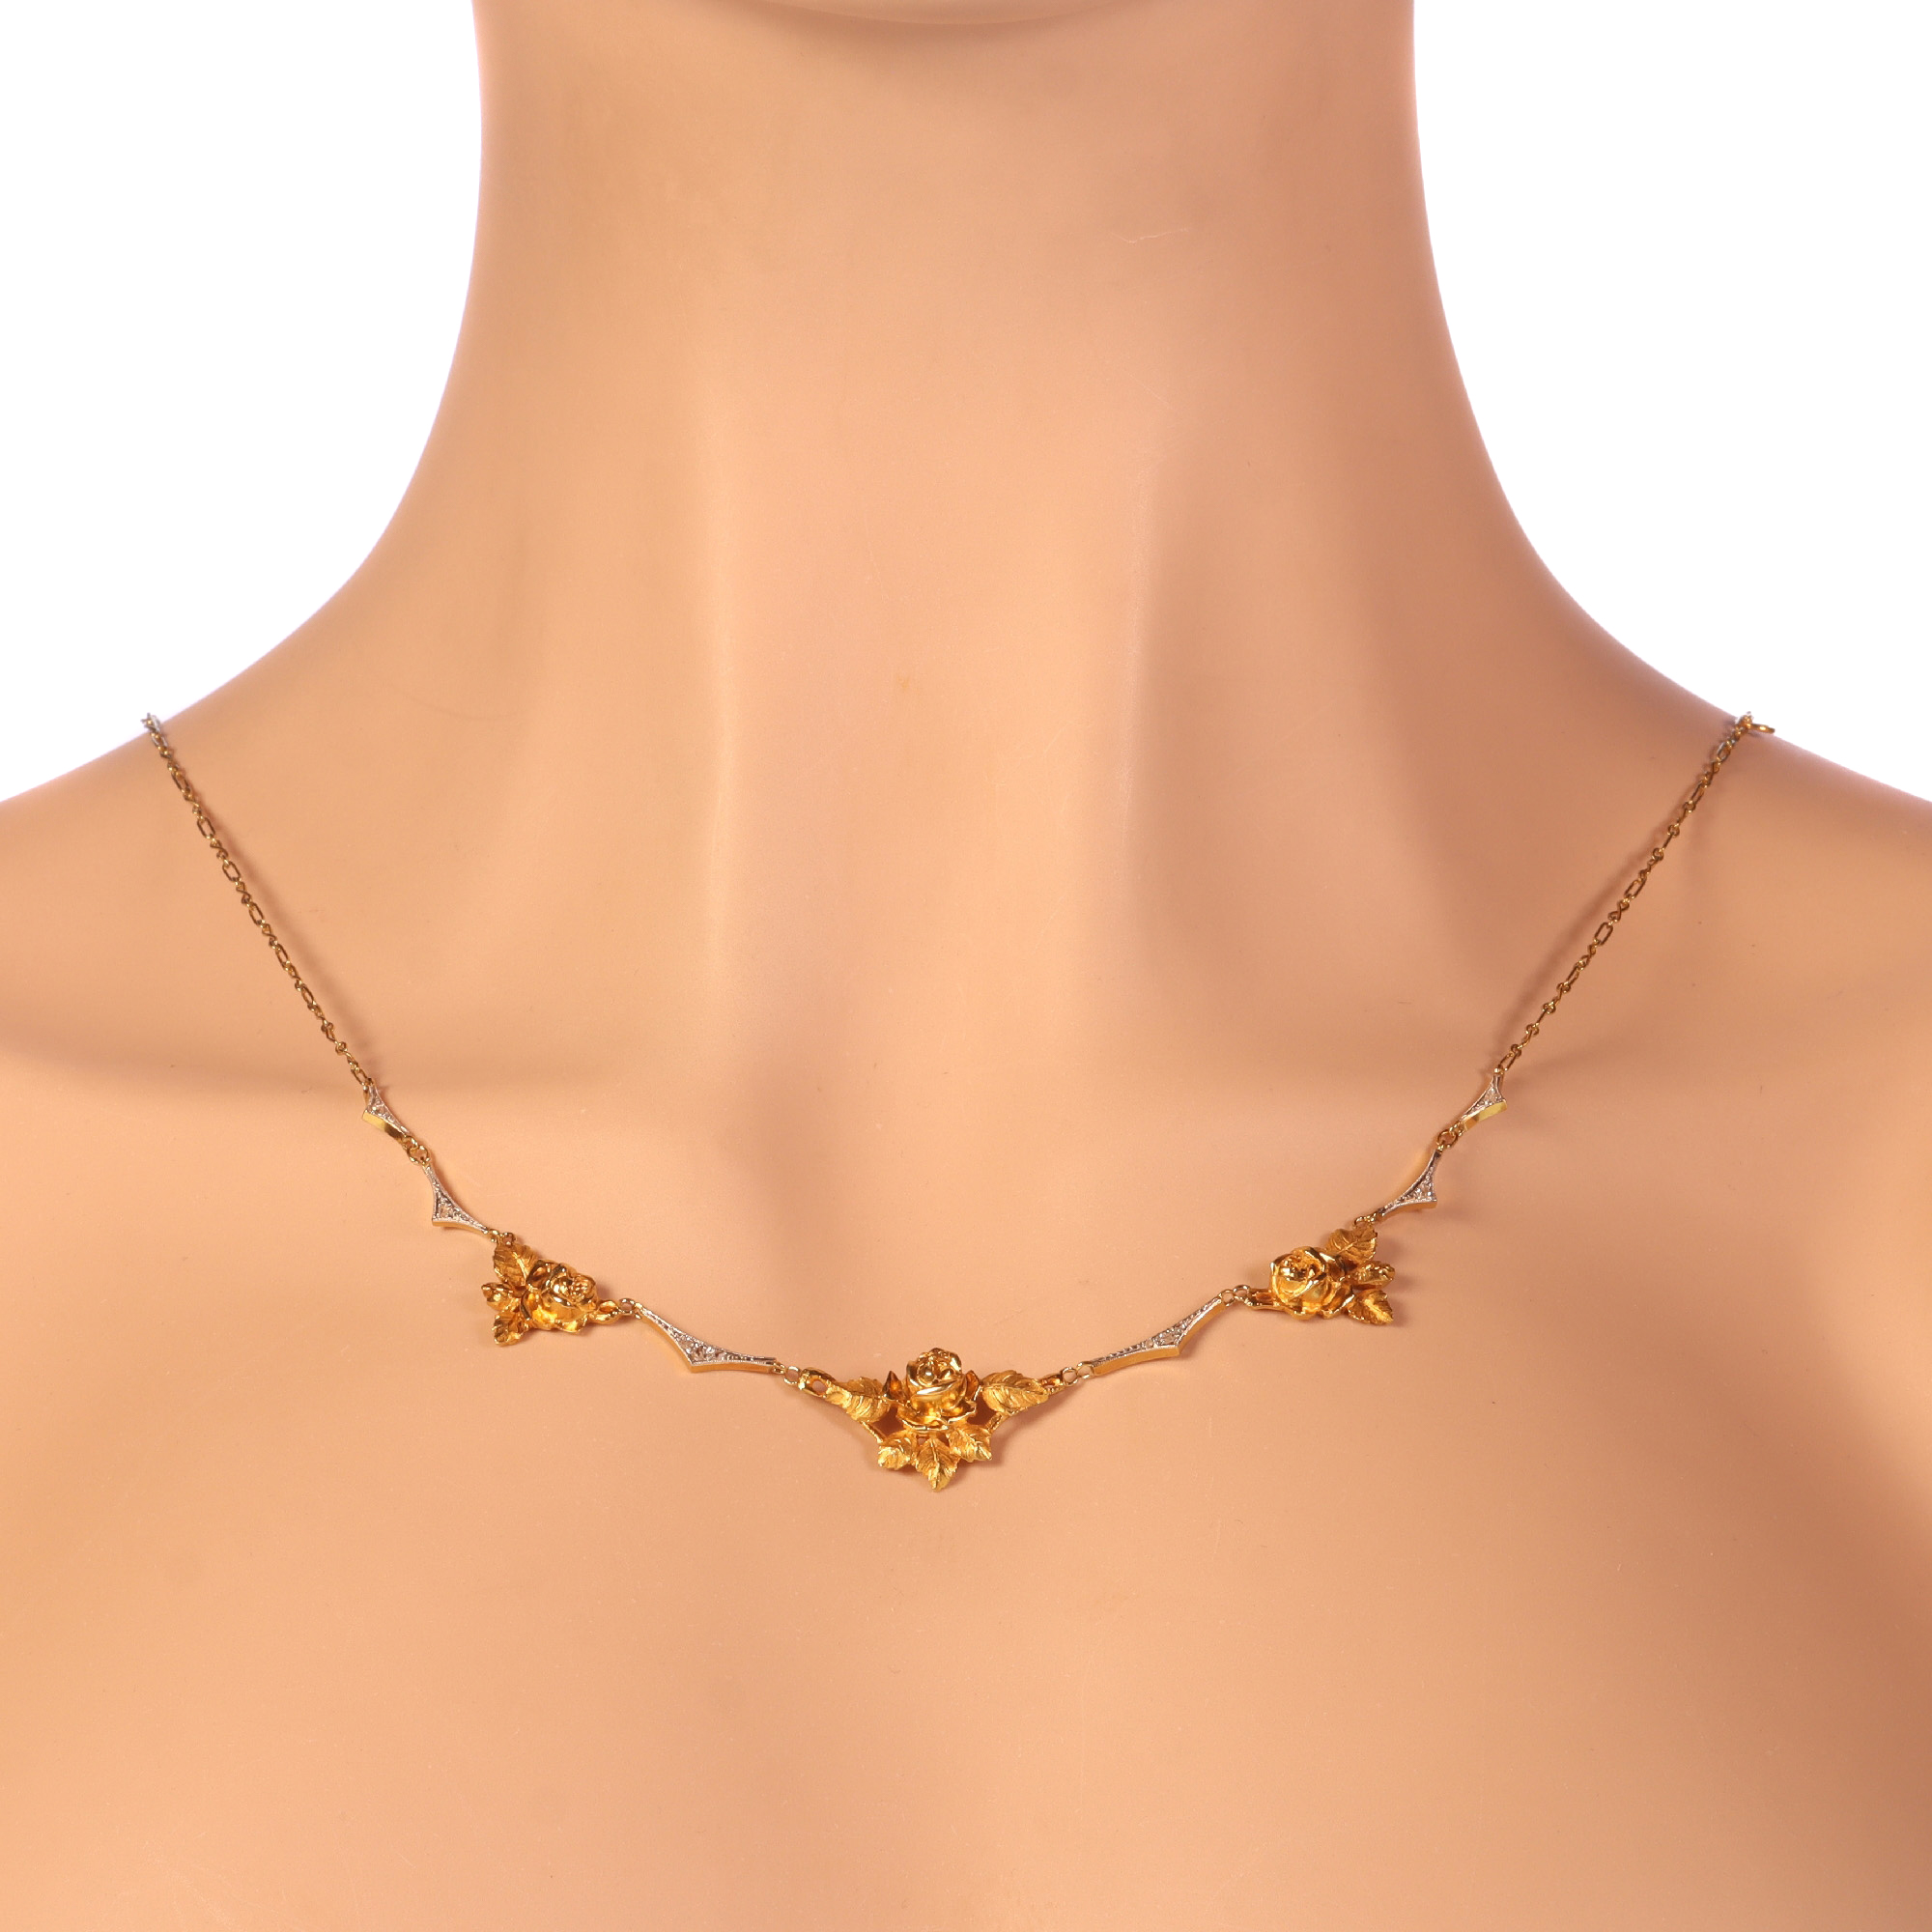 French vintage Belle Epoque 18K gold necklace with rose cut diamonds and gold roses